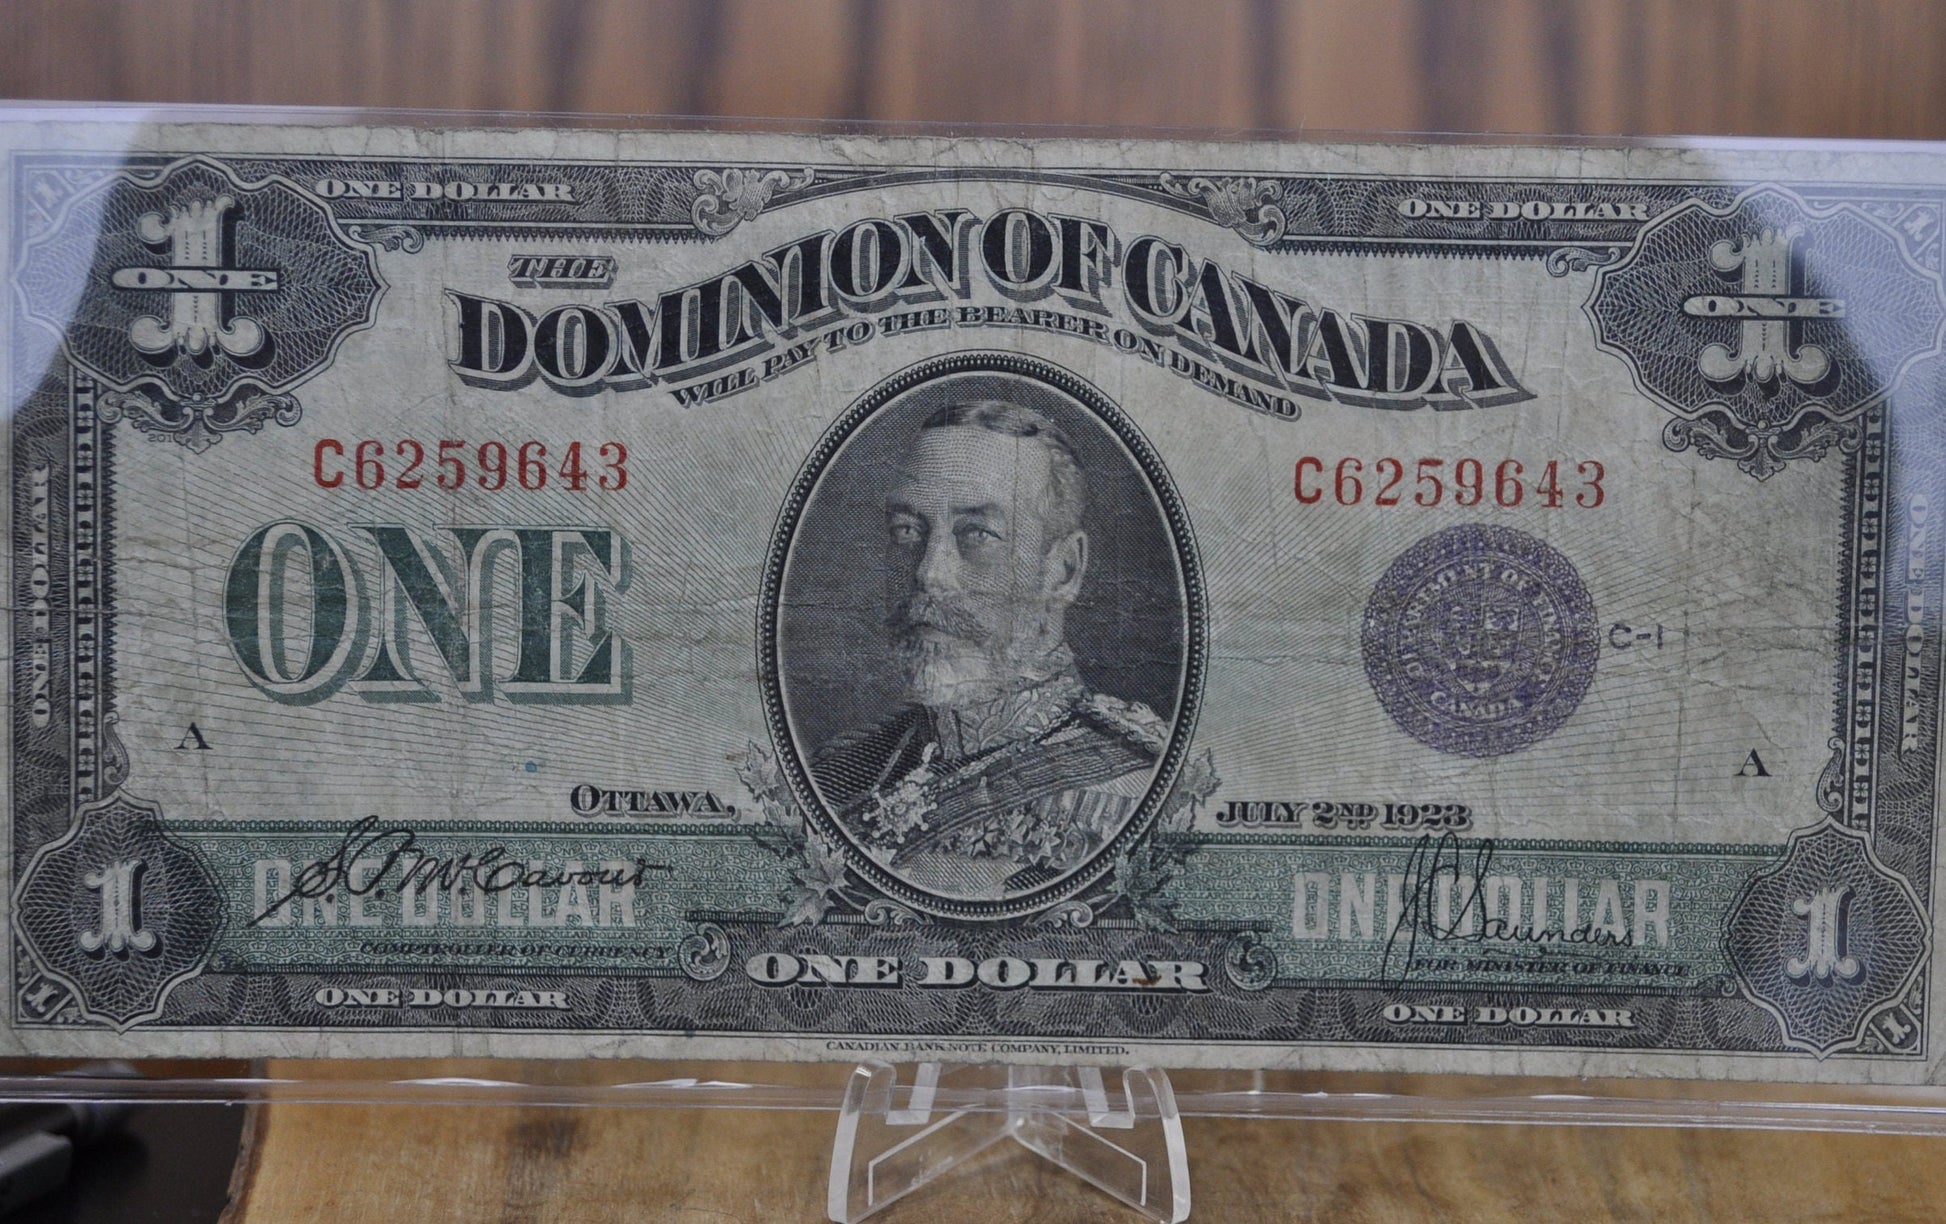 1923 One Dollar Dominion of Canada - VF (Very Fine) - Purple Seal, C Series, Very Rare Type for this Note - McCavour-Saunders - Higher Grade